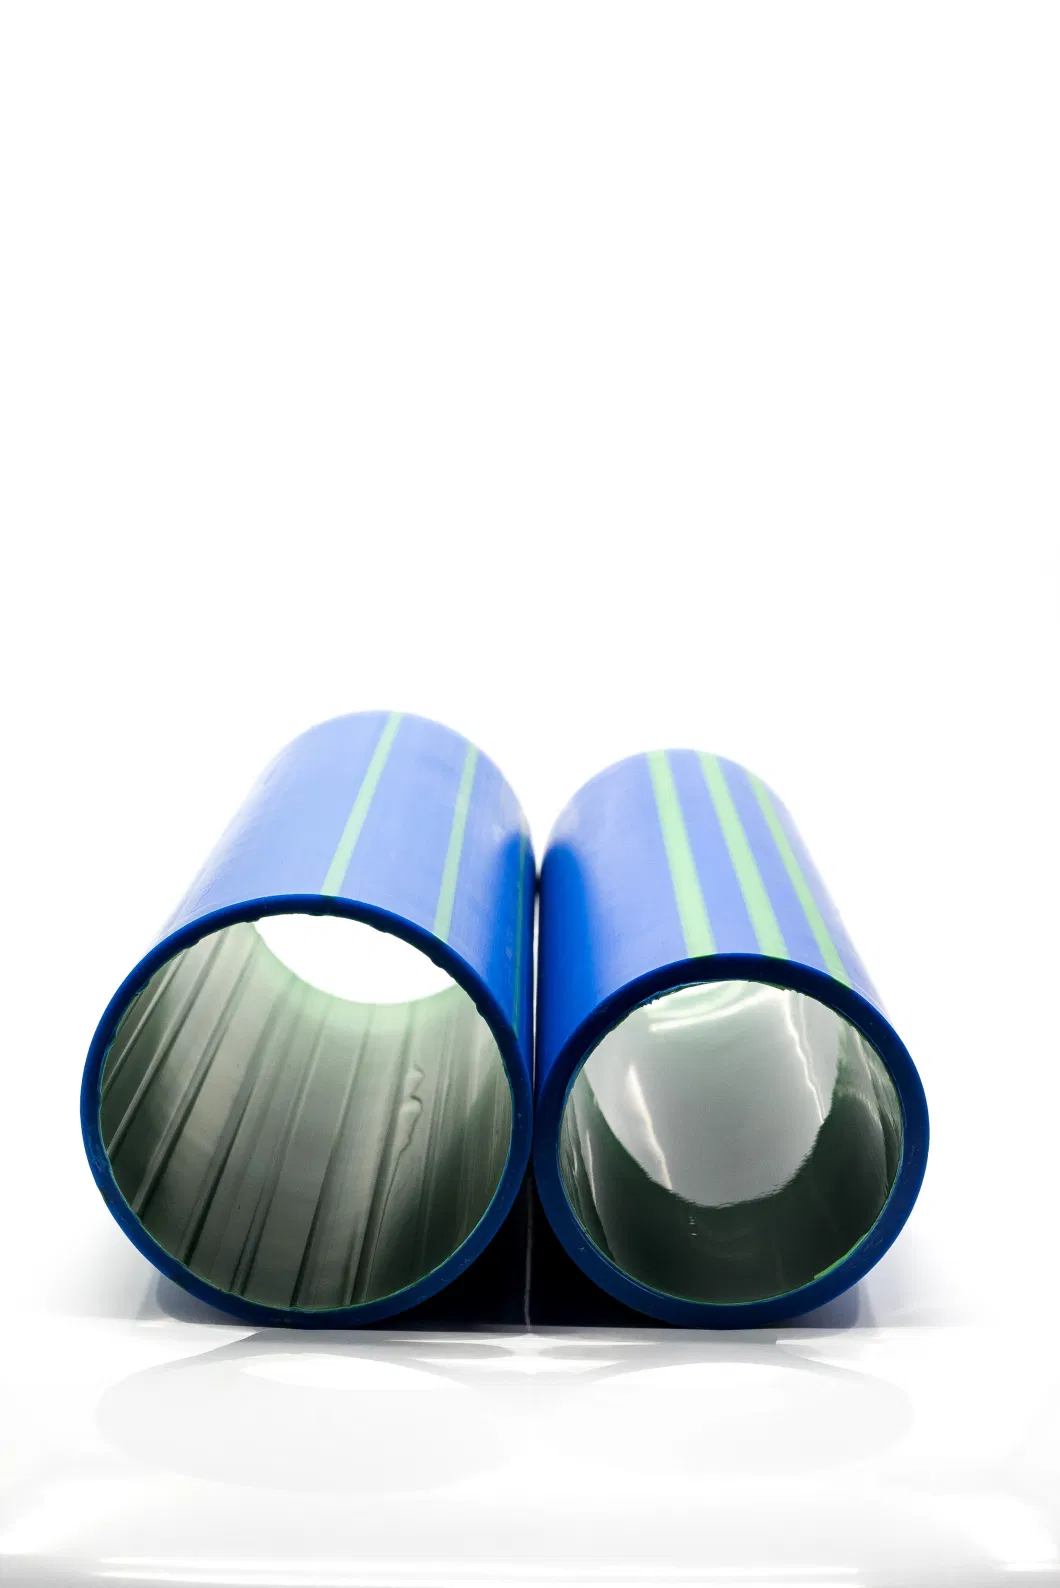 HDPE / Poly / PE Pipe Underground Pipe for Gas Station